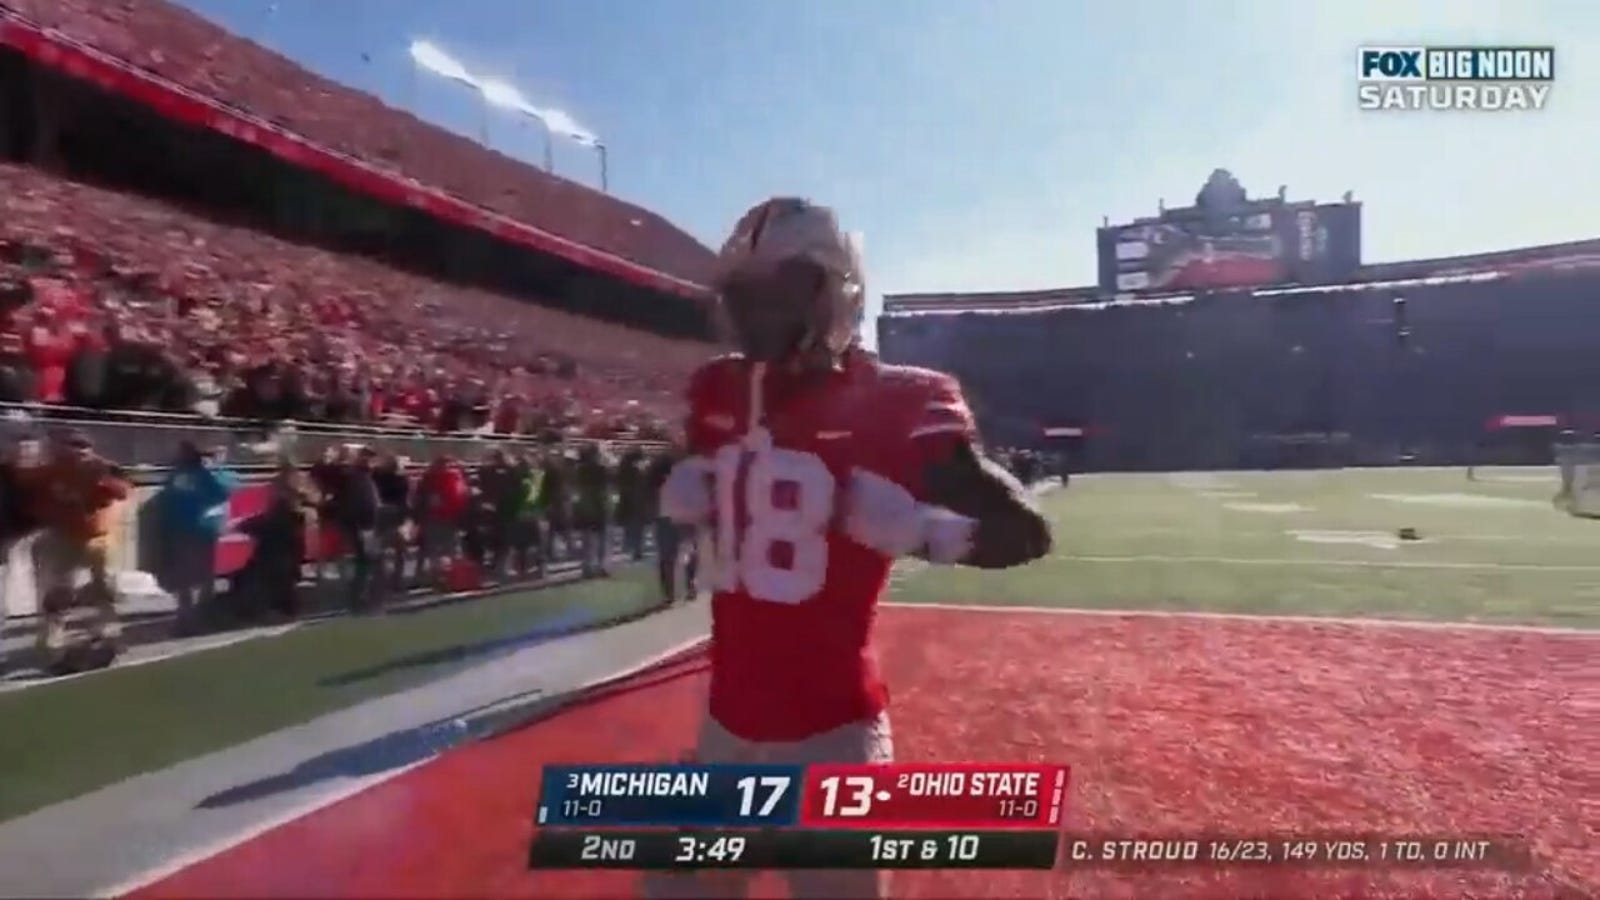 CJ Stroud of Ohio State hits Marvin Harrison Jr. for the 42-yard touchdown